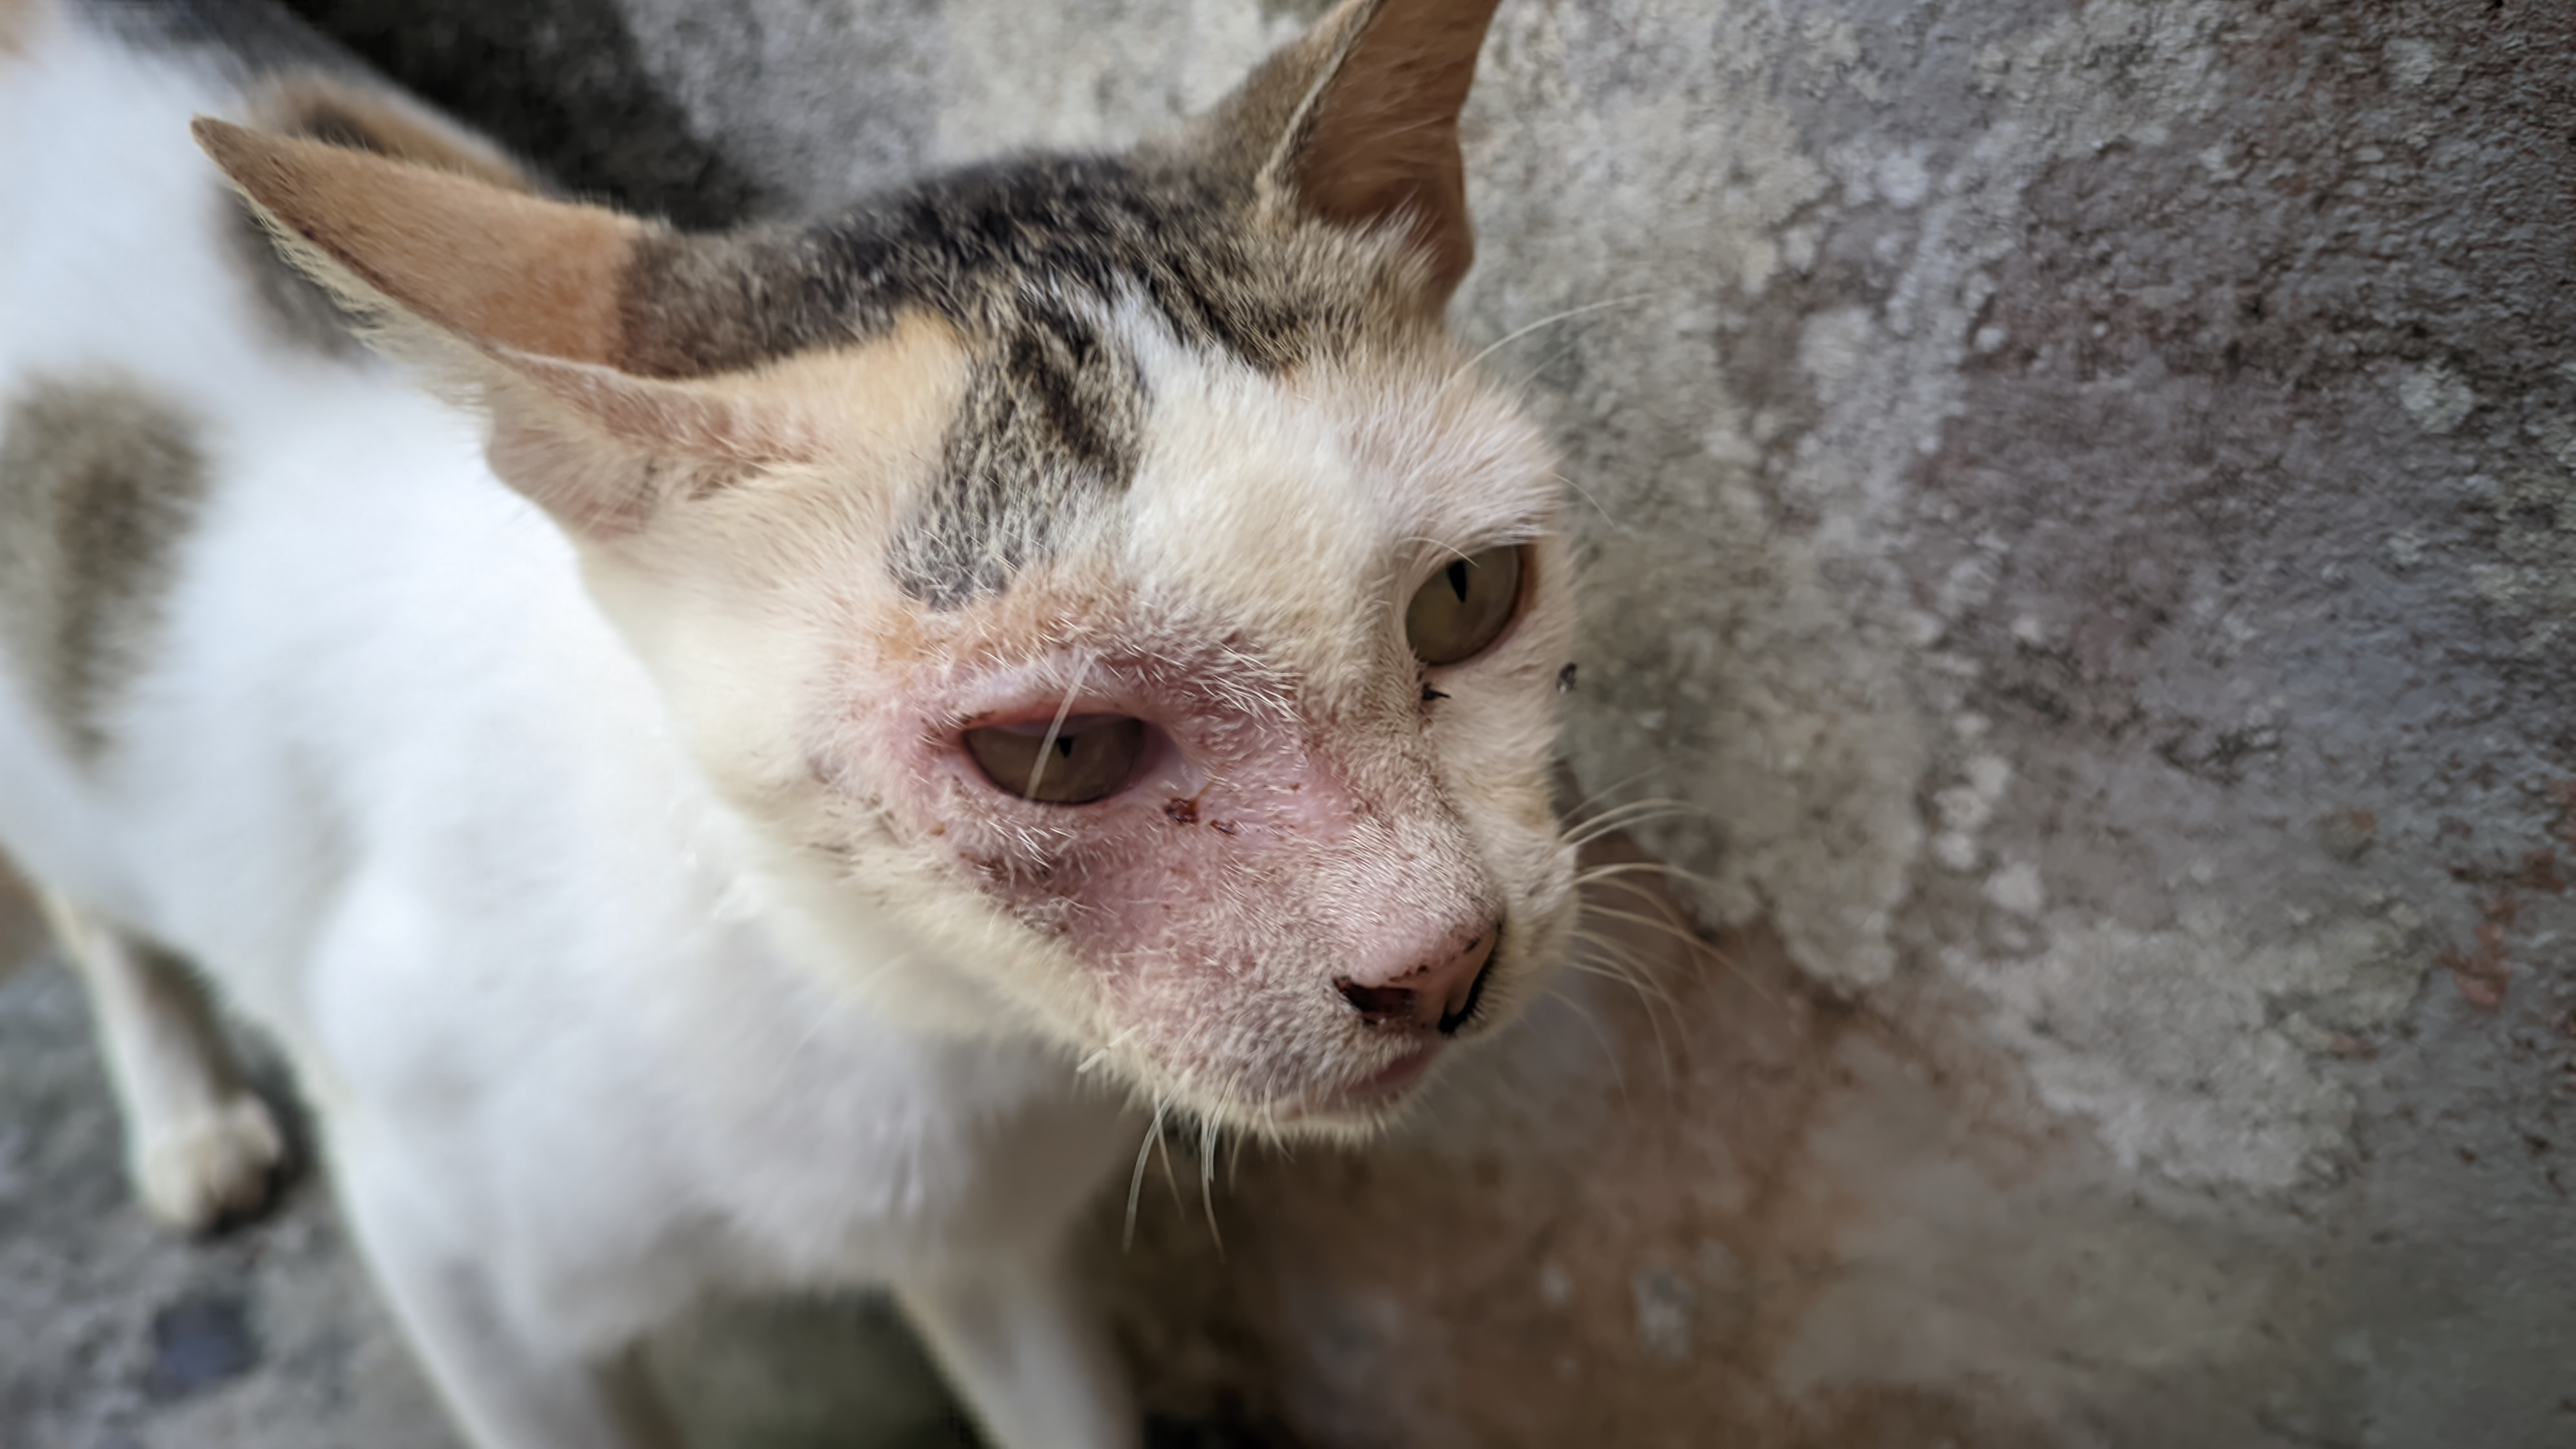 Cat with untreated ringworm lesion on face